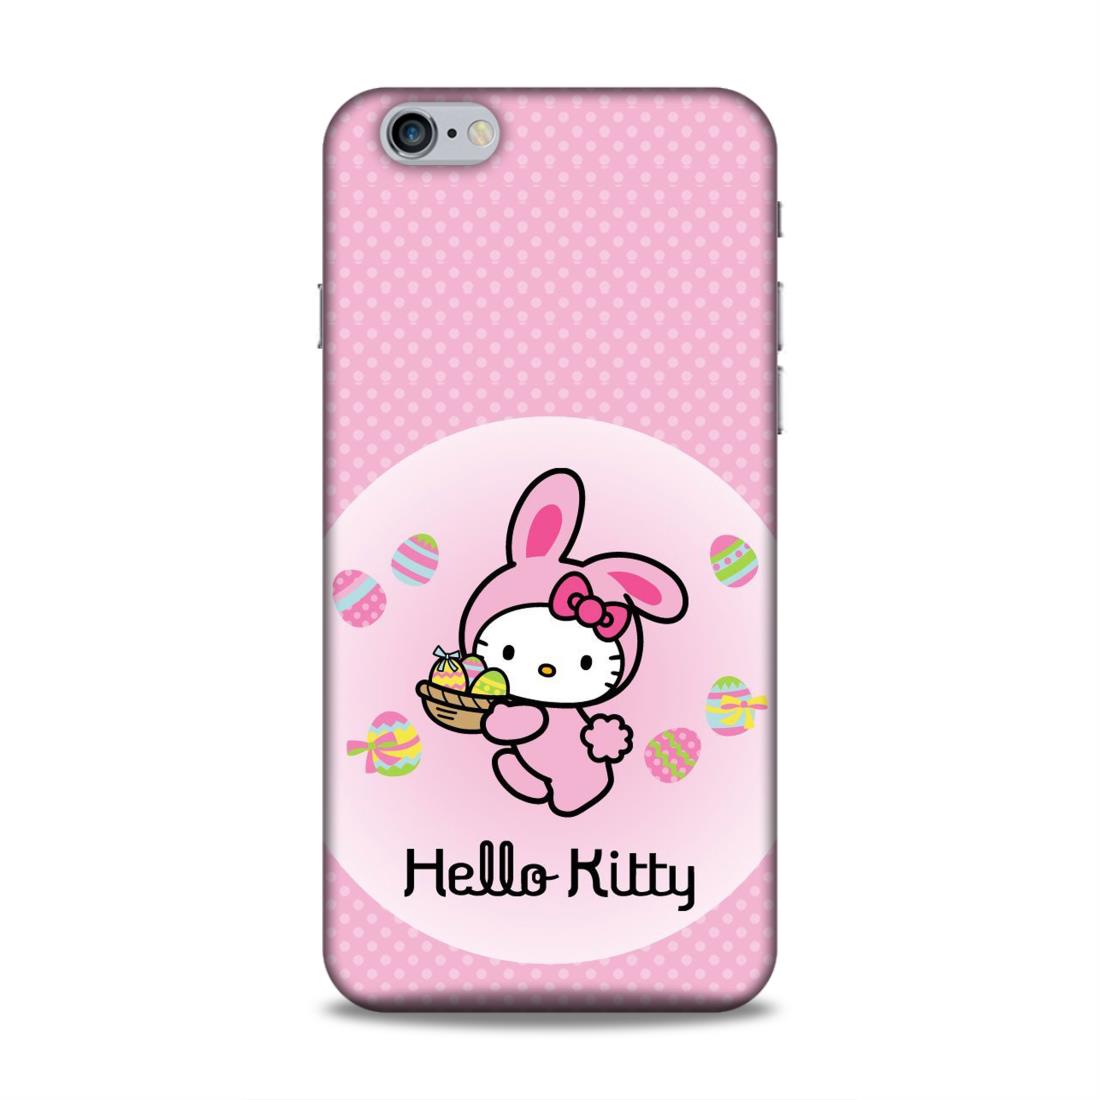 Hello Kitty Hard Back Case For Apple iPhone 6 Plus / 6s Plus